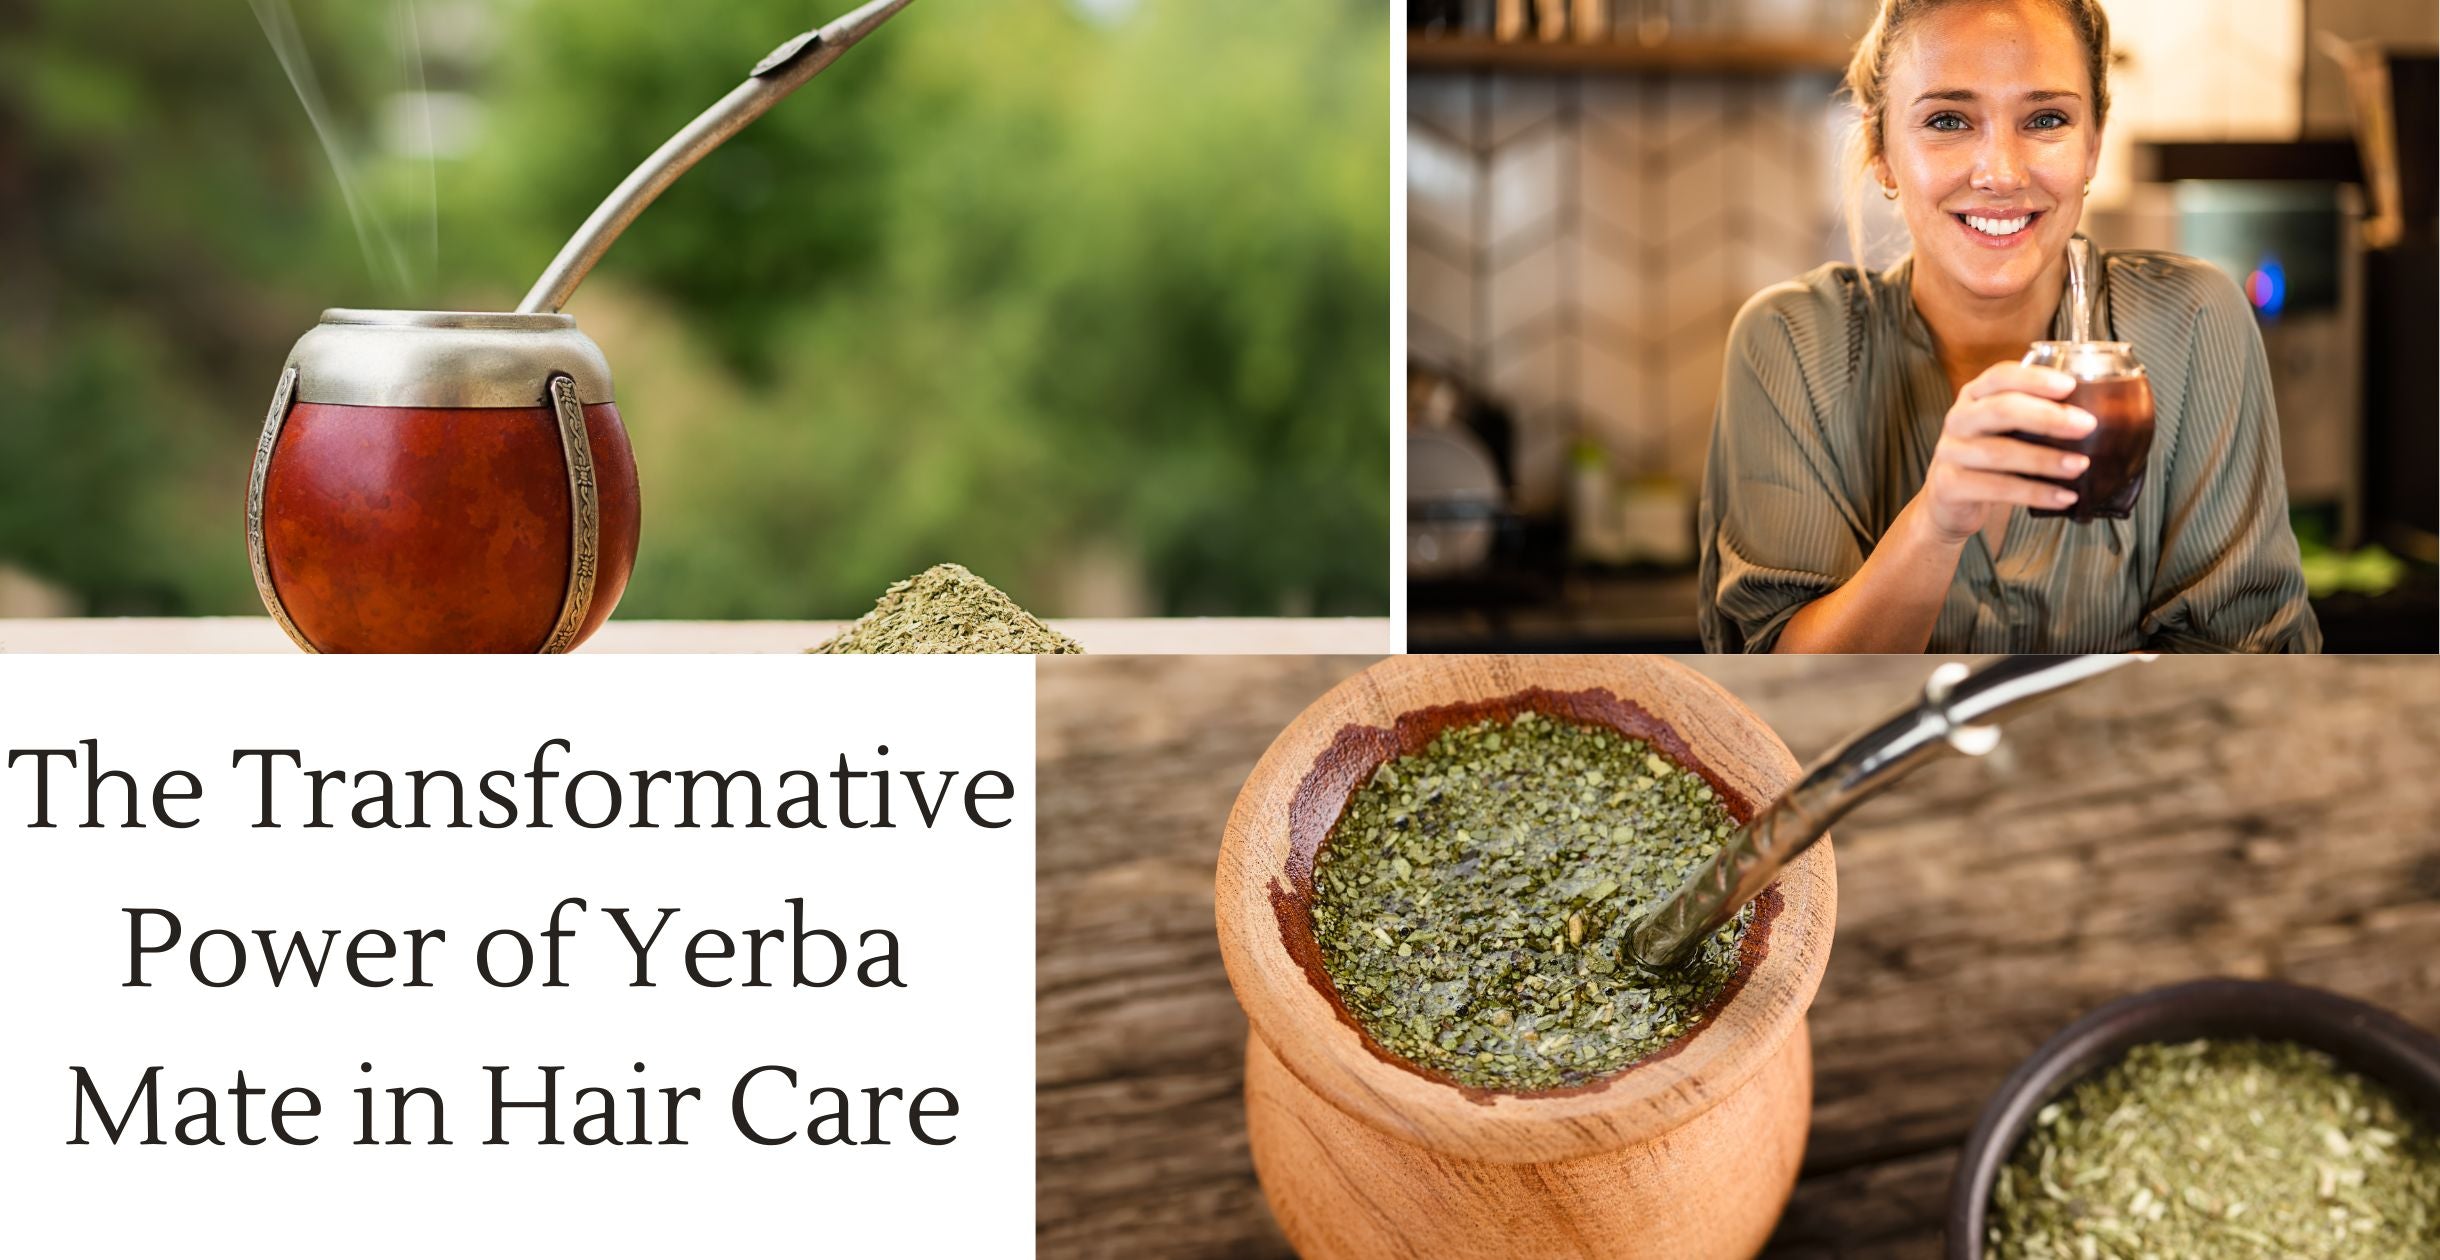 The Transformative Power of Yerba Mate in Hair Care